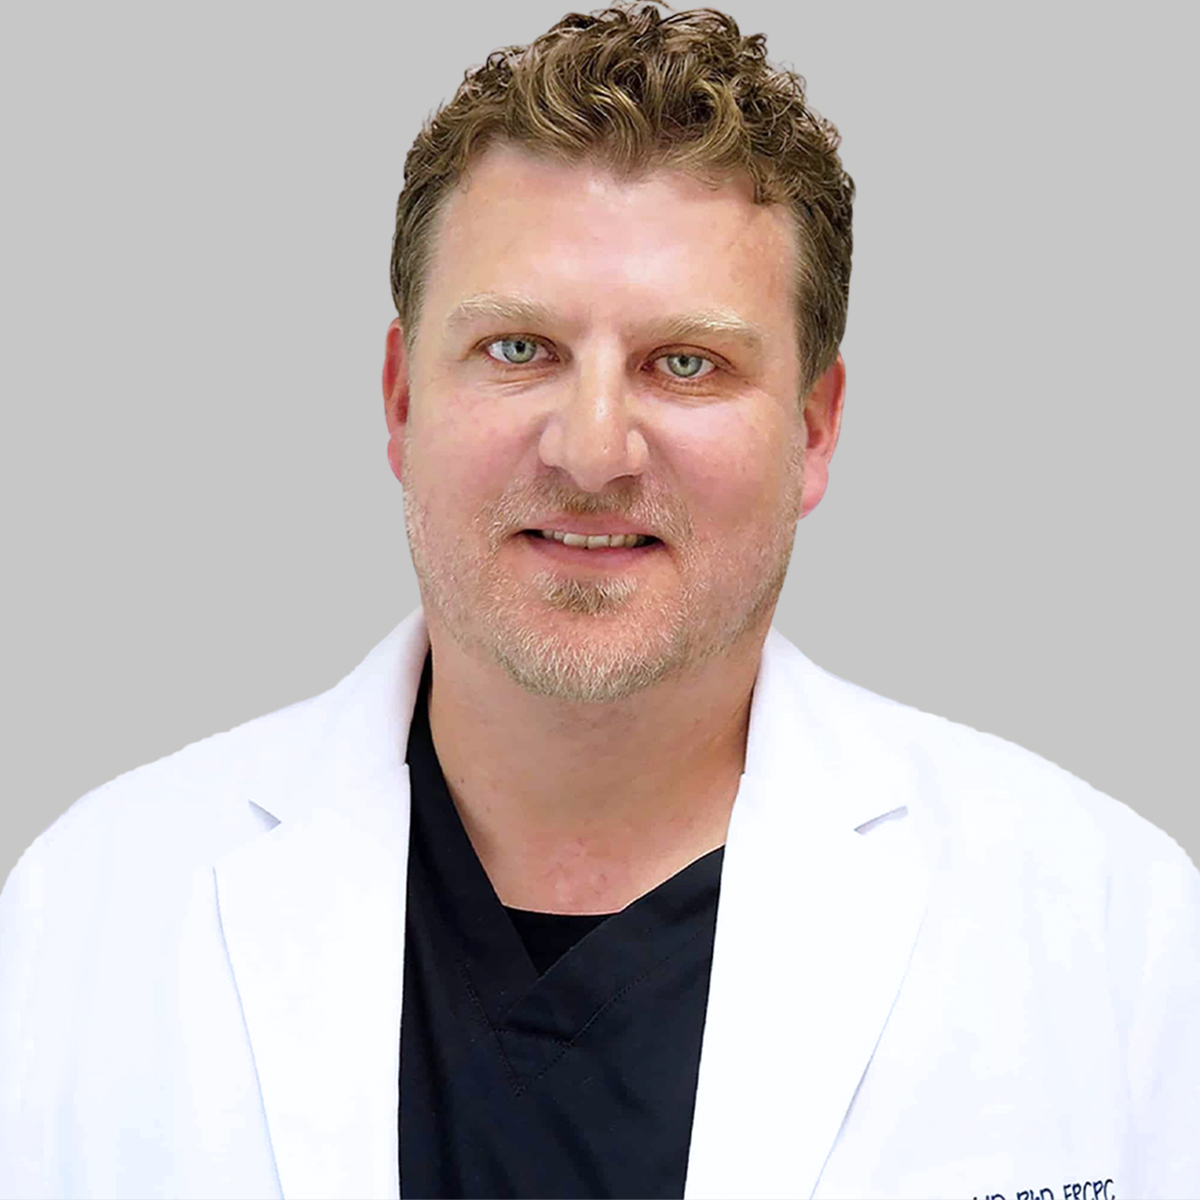 DR. CHRIS SIBLEY
DERMATOLOGIST AND MEDICAL DIRECTOR IN OTTAWA